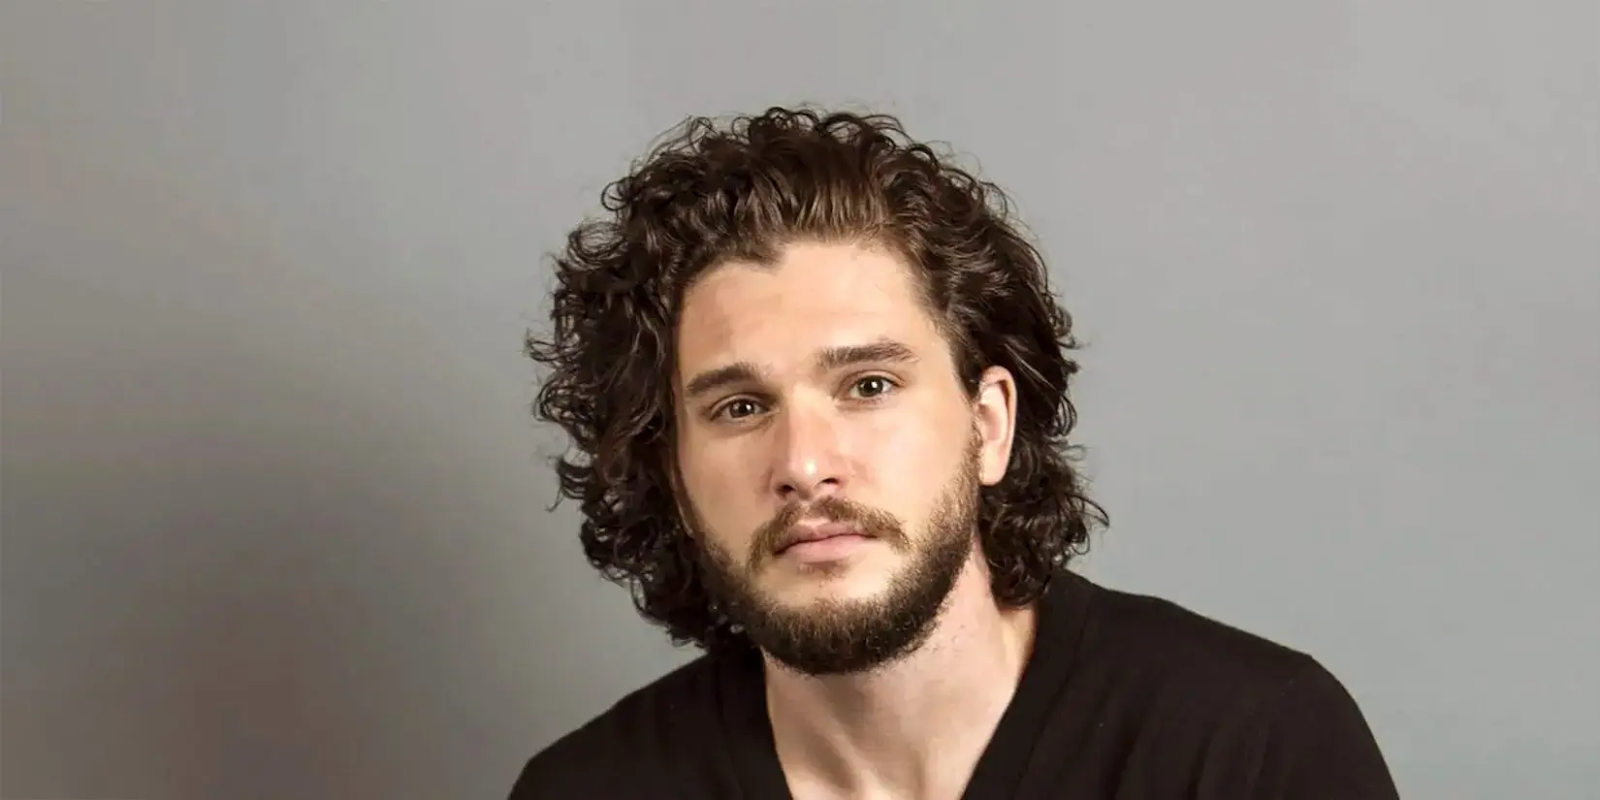 Kit Harington looking cute in his curly hairstyle for men